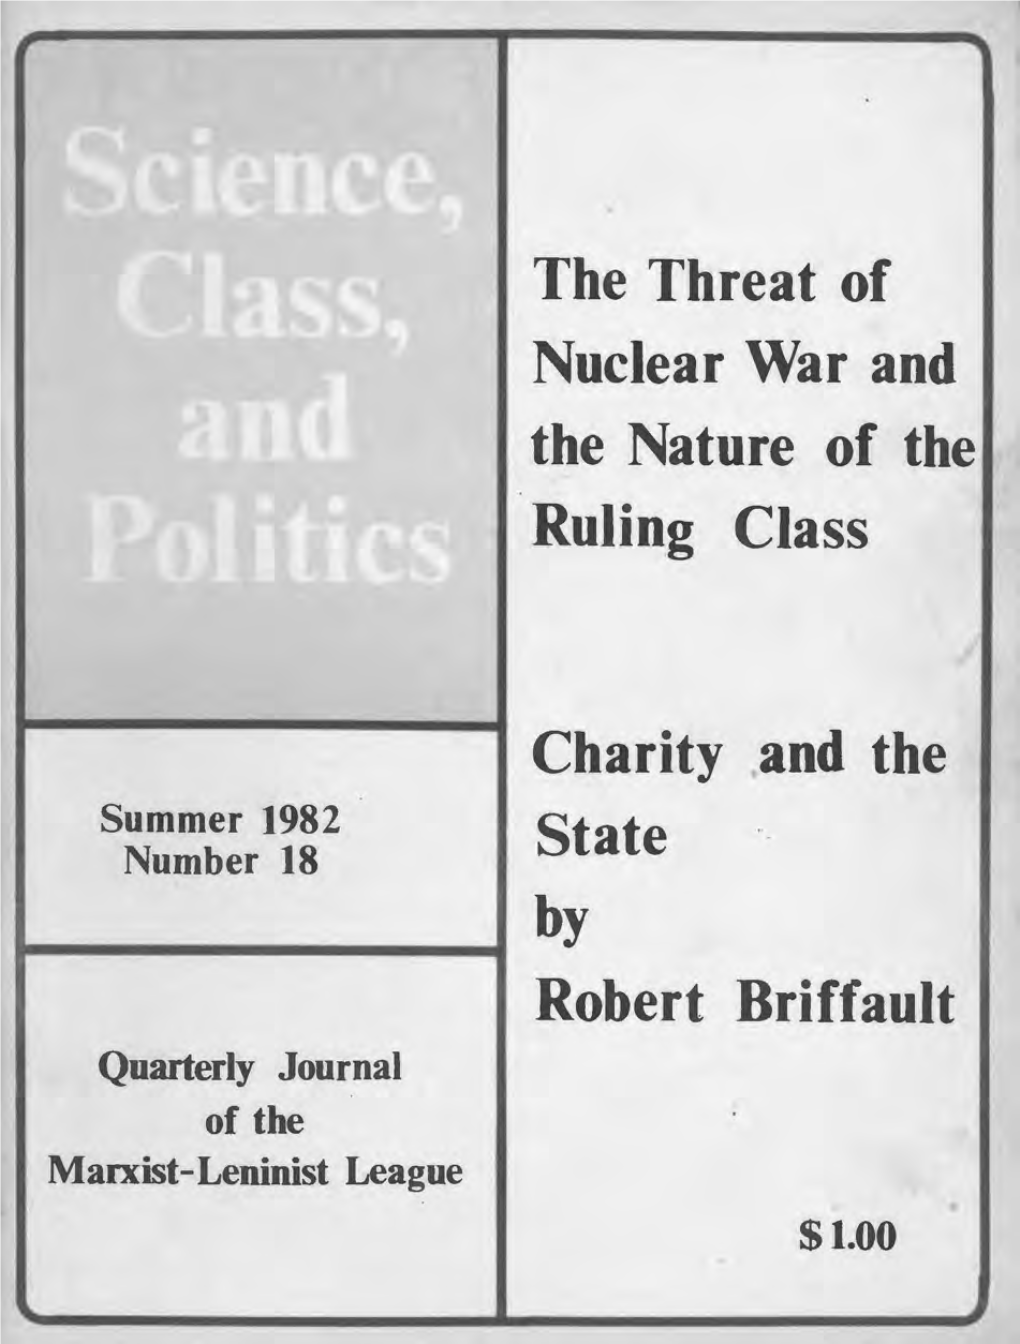 The Threat of Nuclear War and the Nature of the Ruling Class Charity